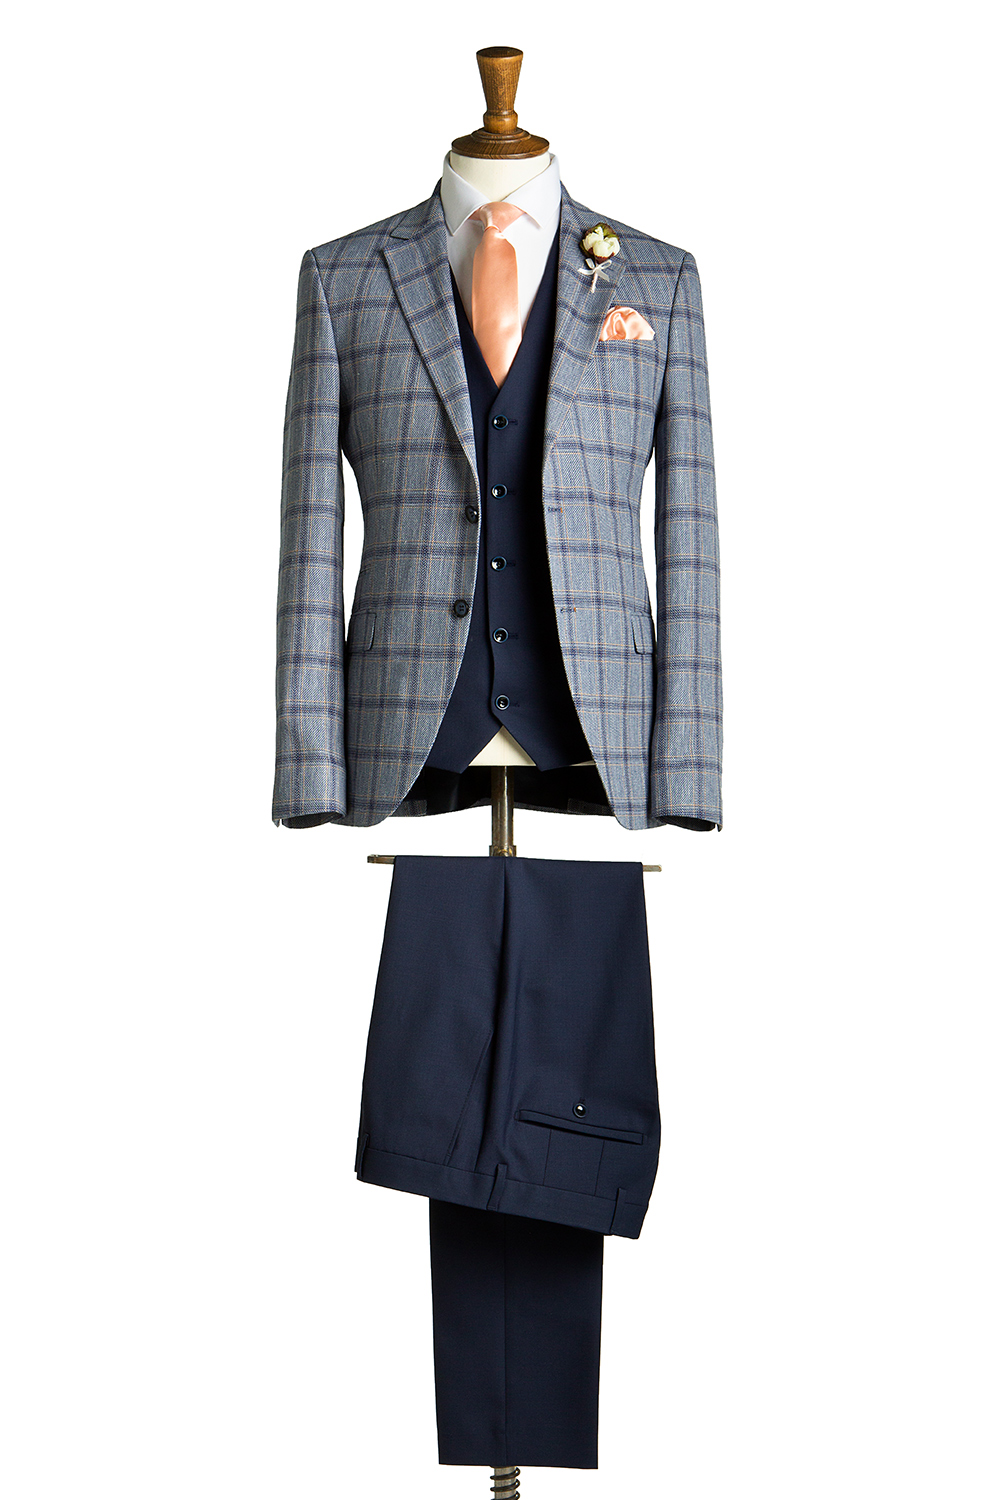 Tompson Pale Blue Windowpane Check Suit - Tom Murphy's Formal and Menswear